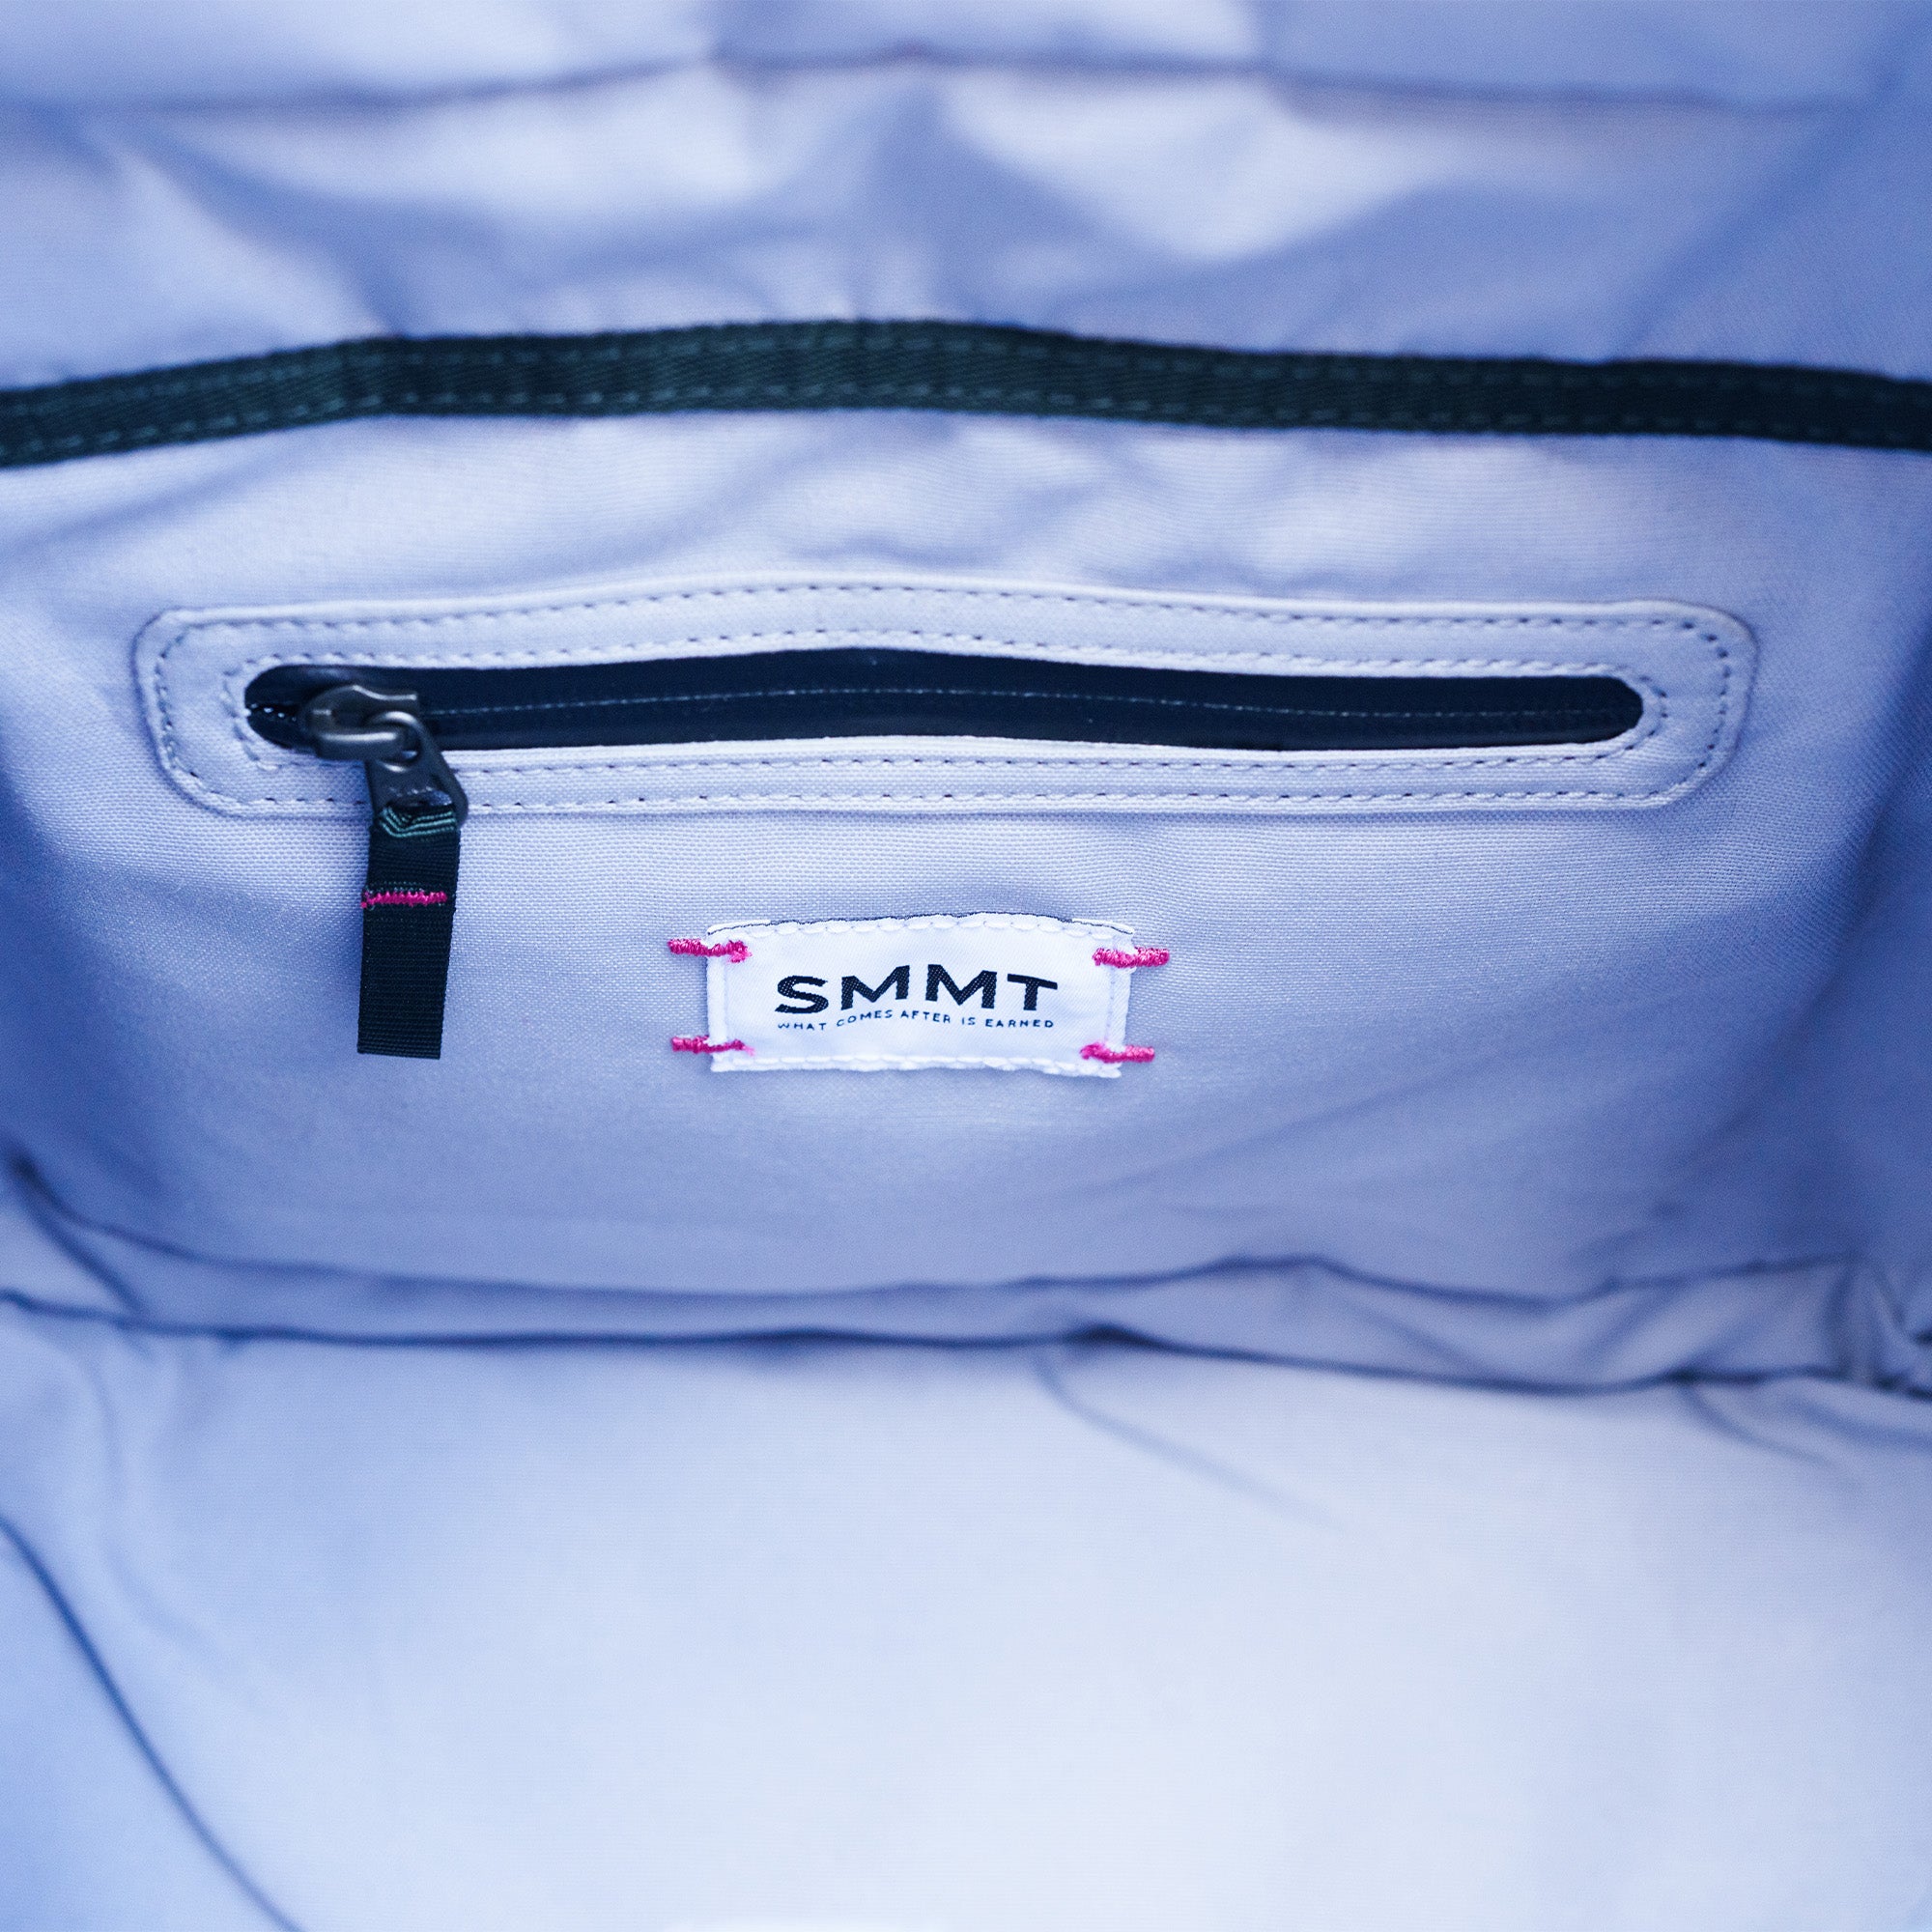 interior zipper and pink stitching detail on smmt tote bag